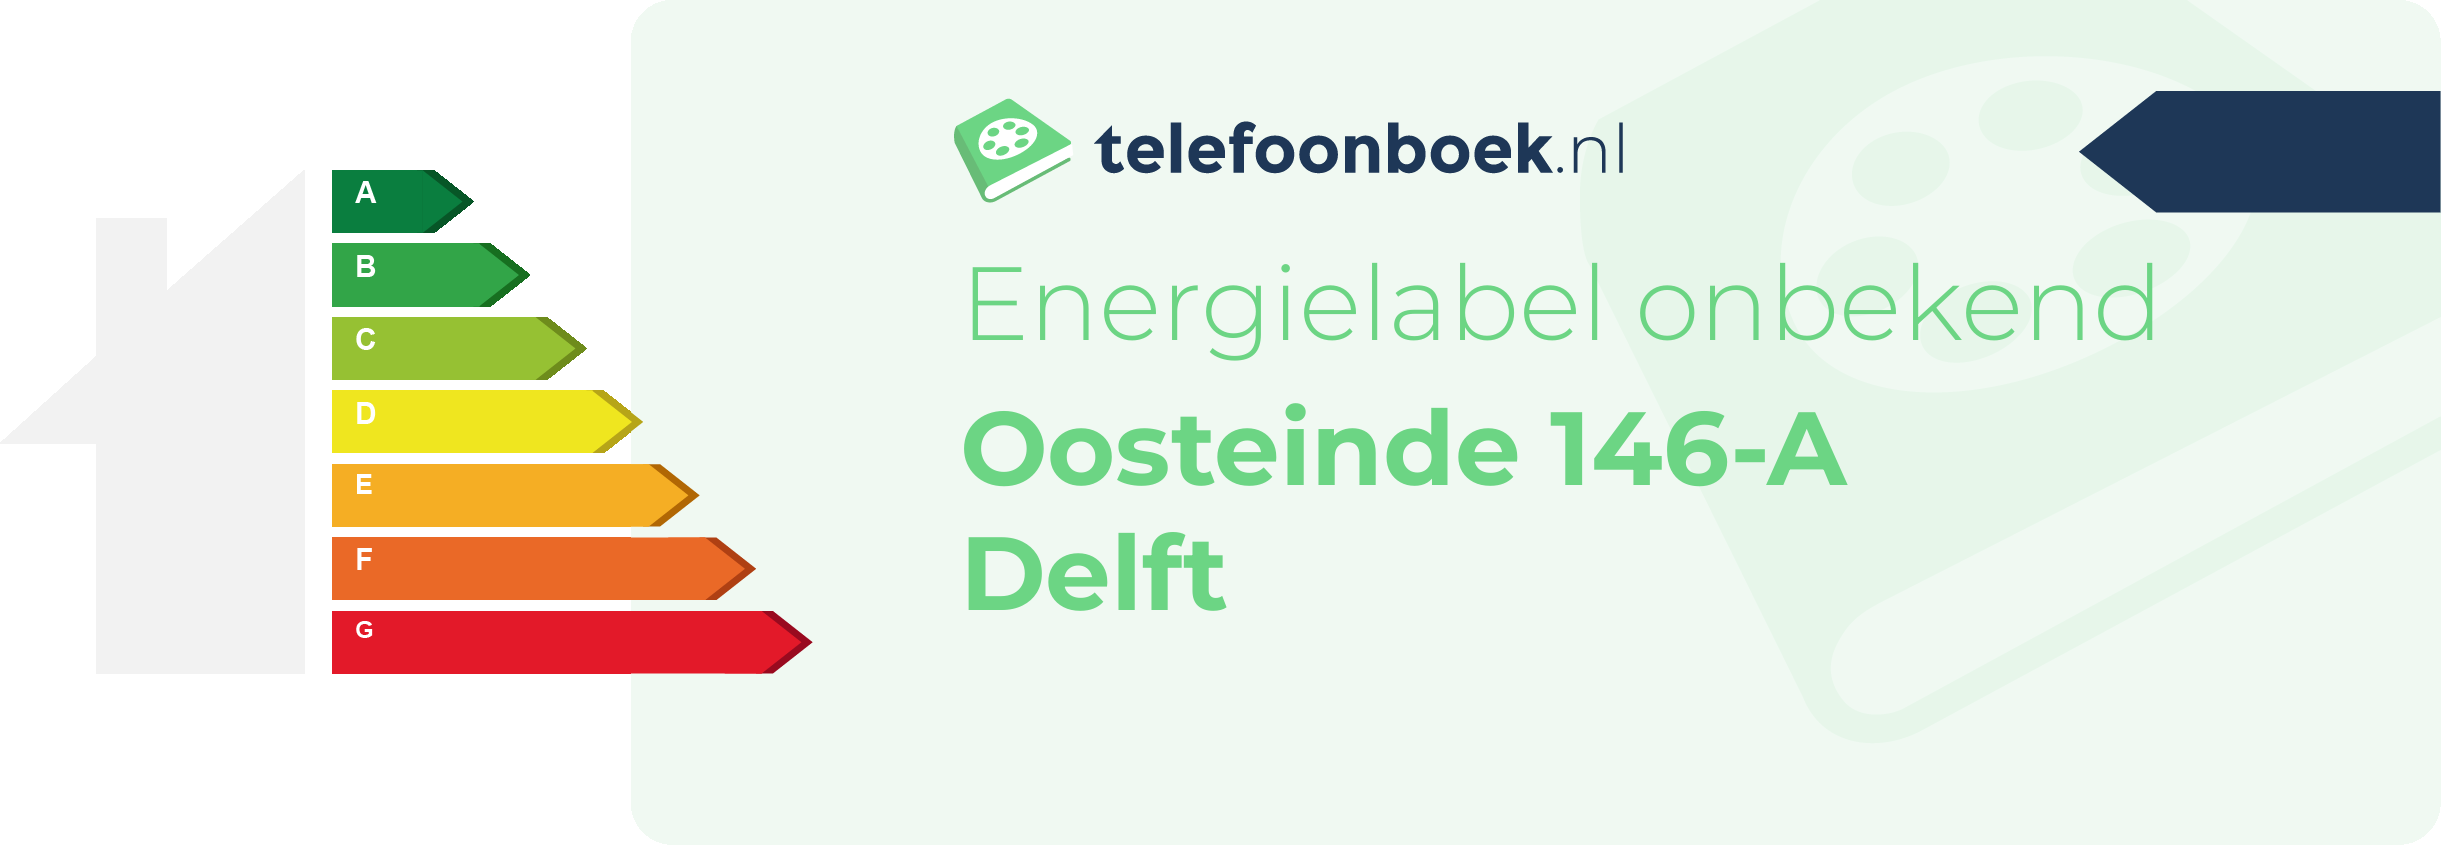 Energielabel Oosteinde 146-A Delft